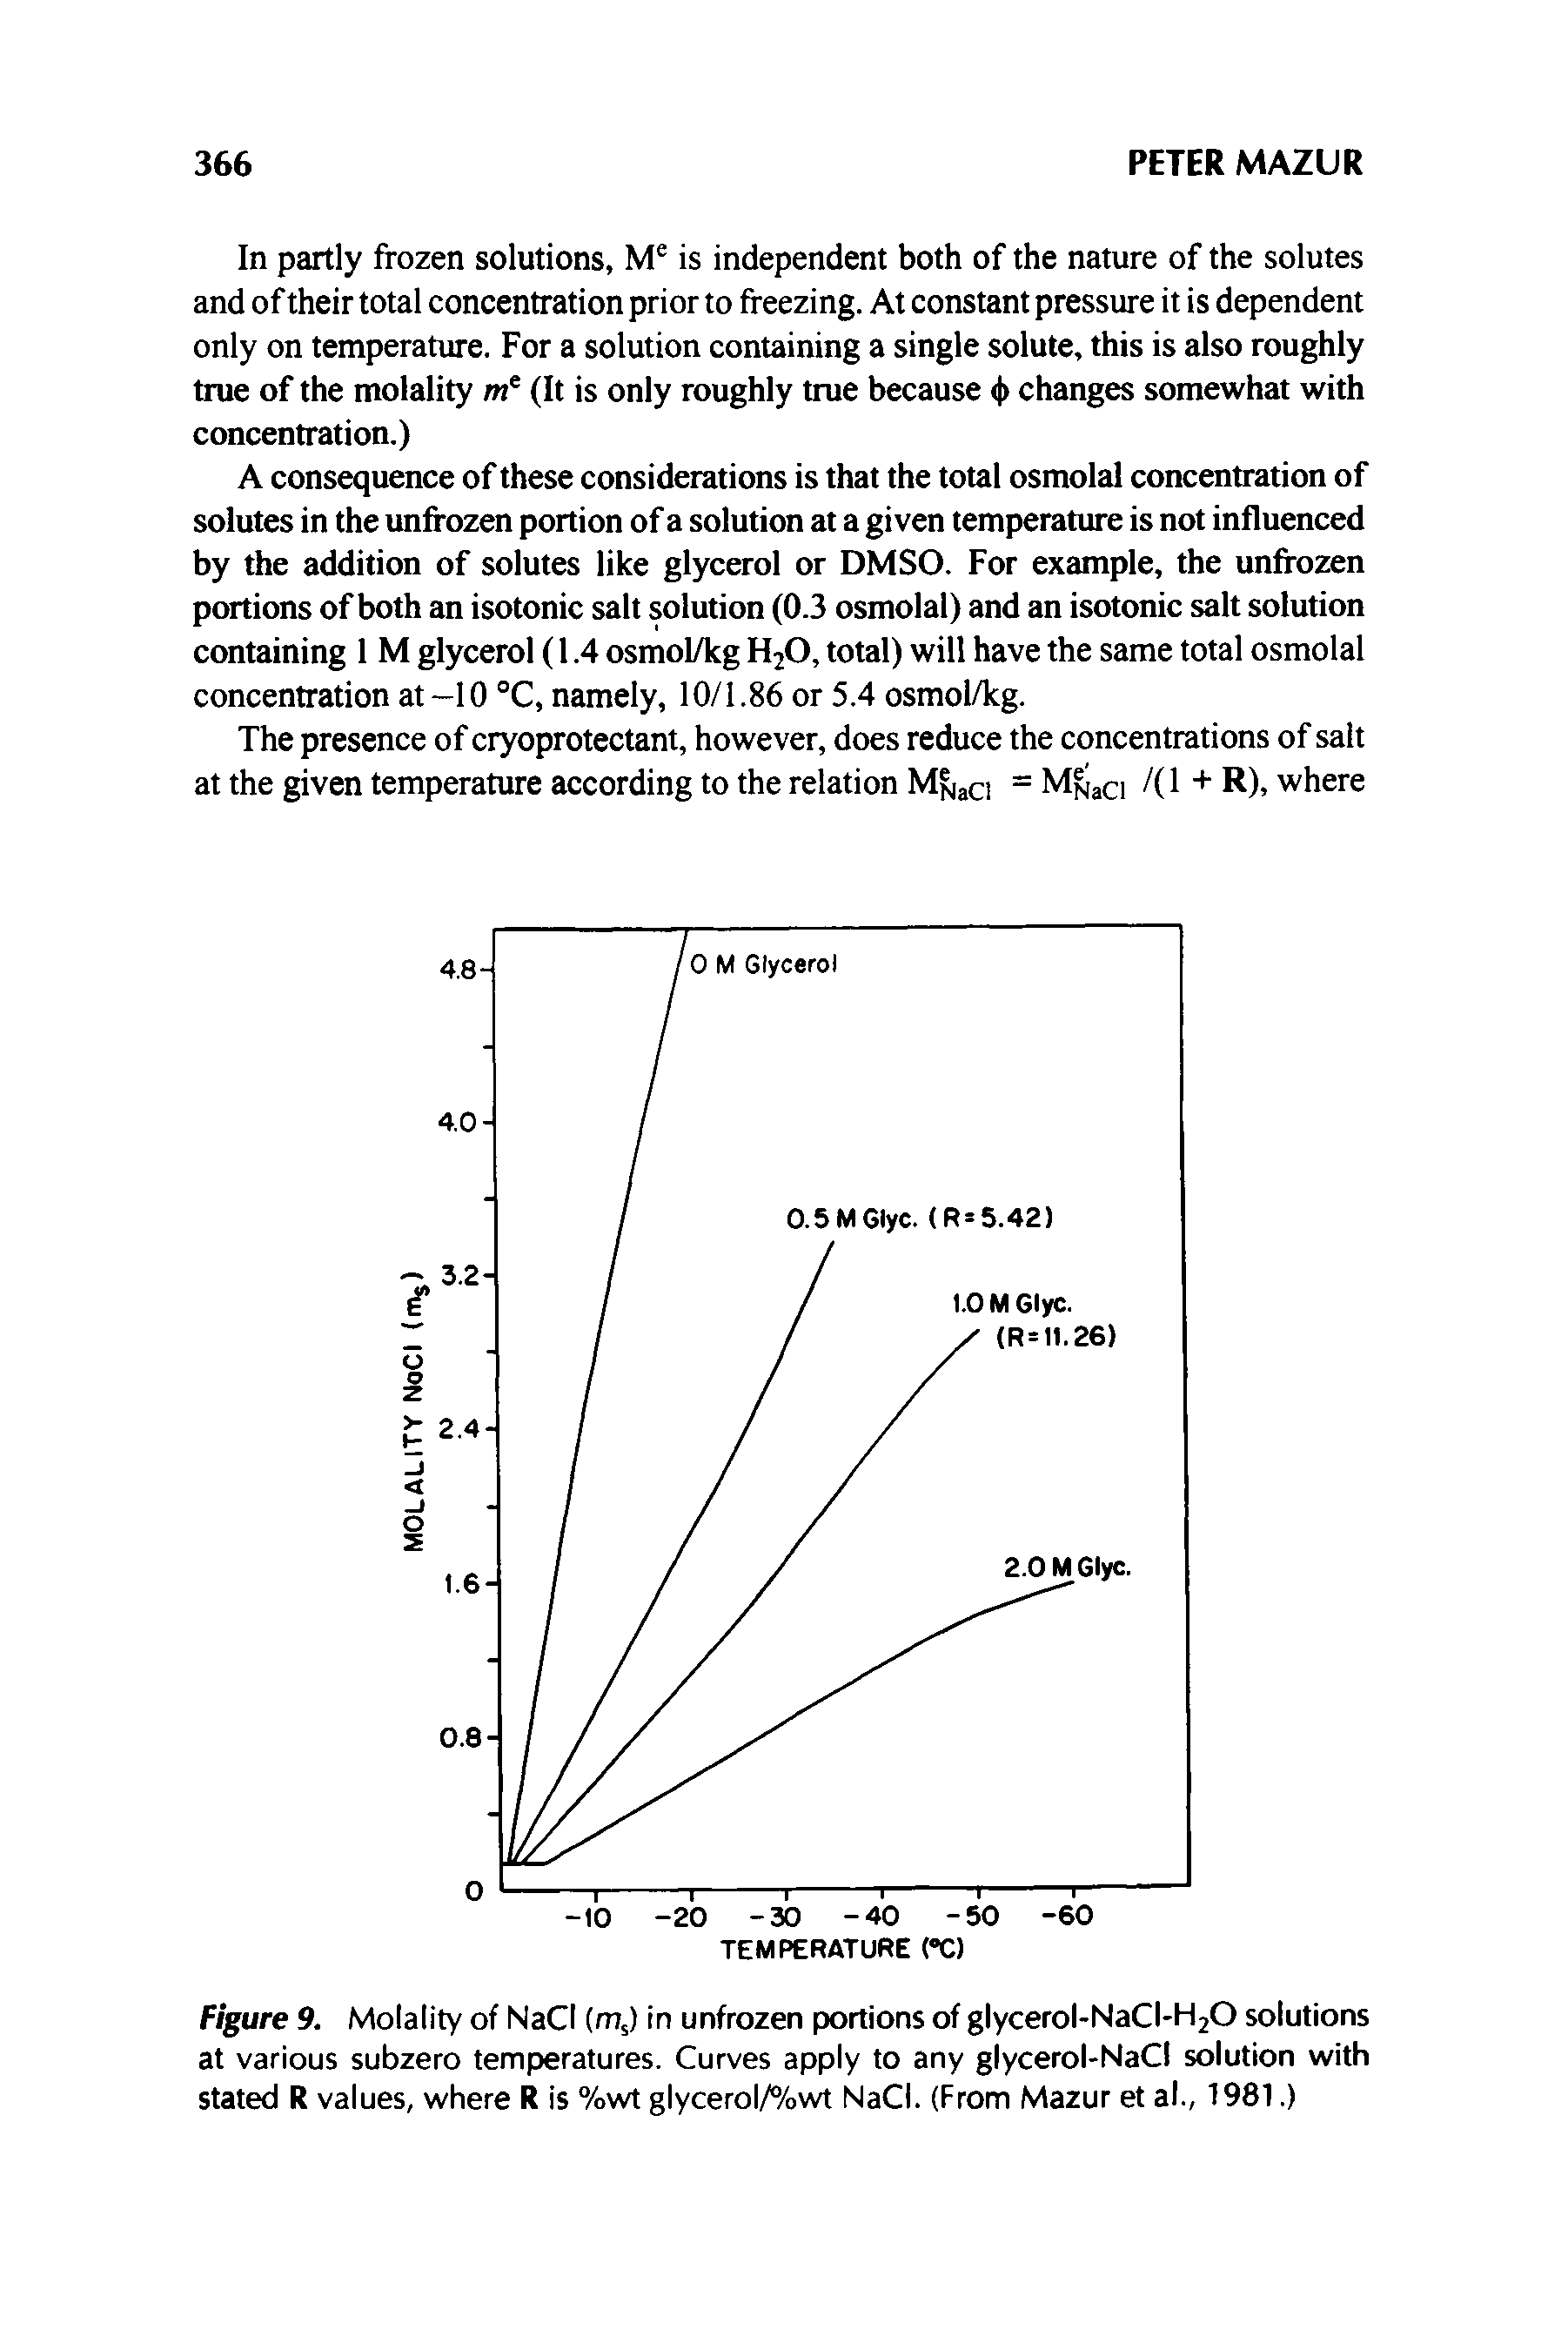 Figure 9. Molality of NaCI (mj in unfrozen portions of glycerol-NaCI-HjO solutions at various subzero temperatures. Curves apply to any glycerol-NaCI solution with stated R values, where R is %wt glycerol/%wt NaCI. (From Mazur et al., 1981.)...